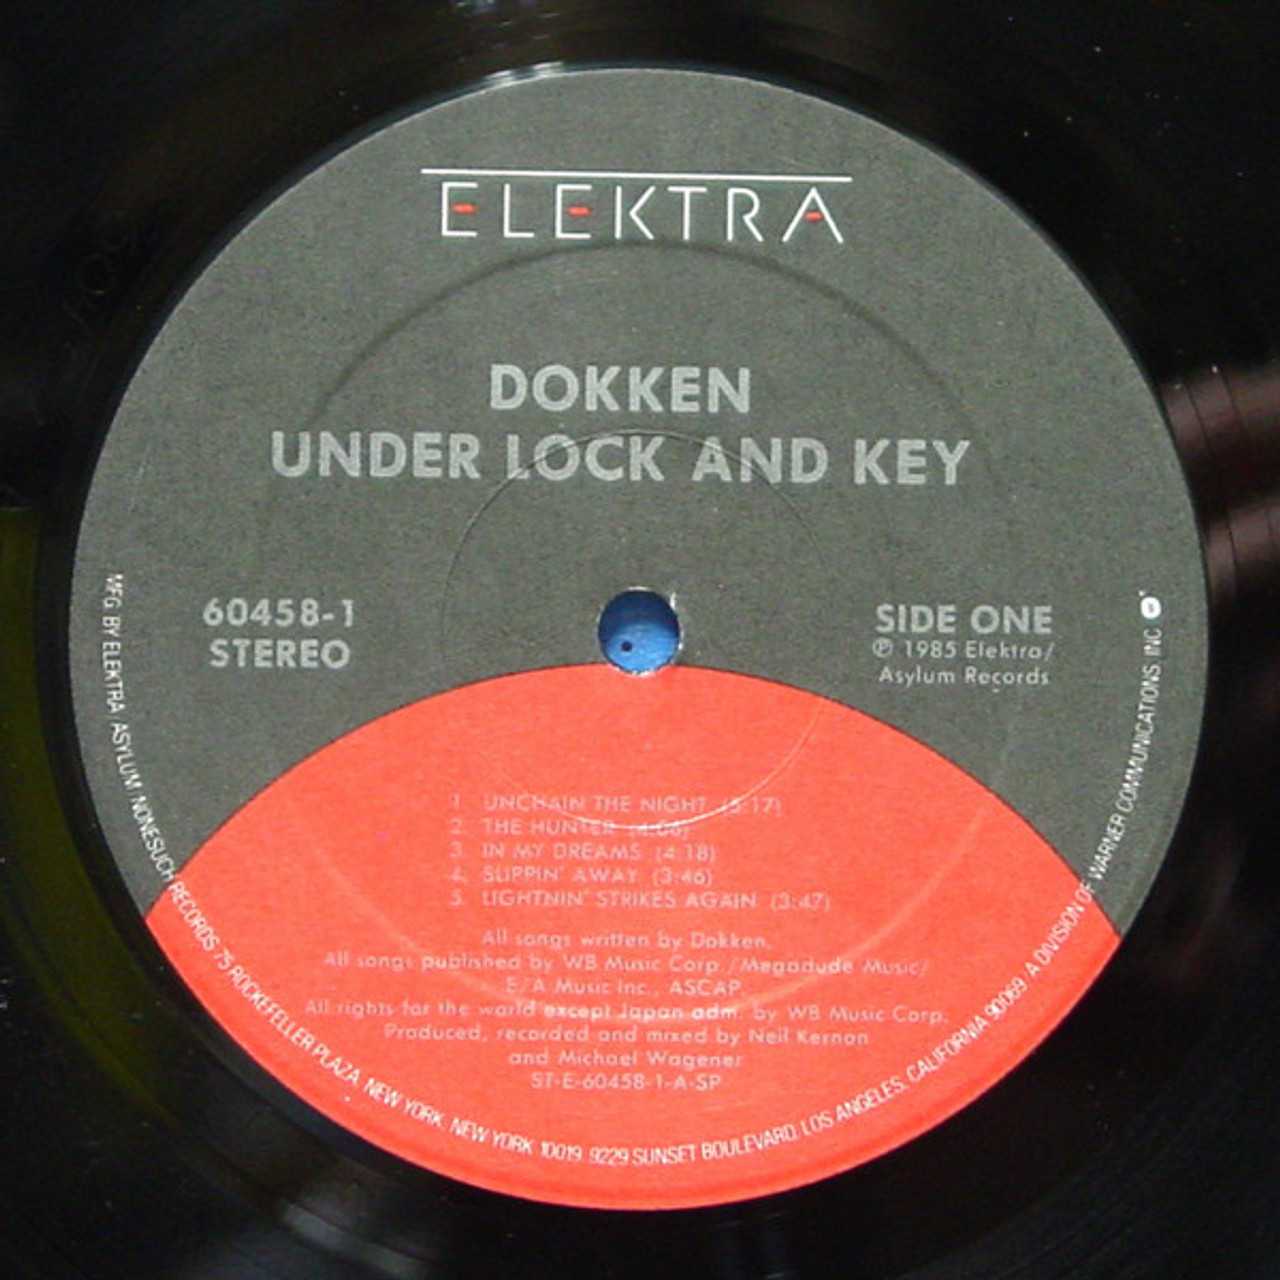 Under Lock and Key from the Audiomachine release ANOTHER SKY 